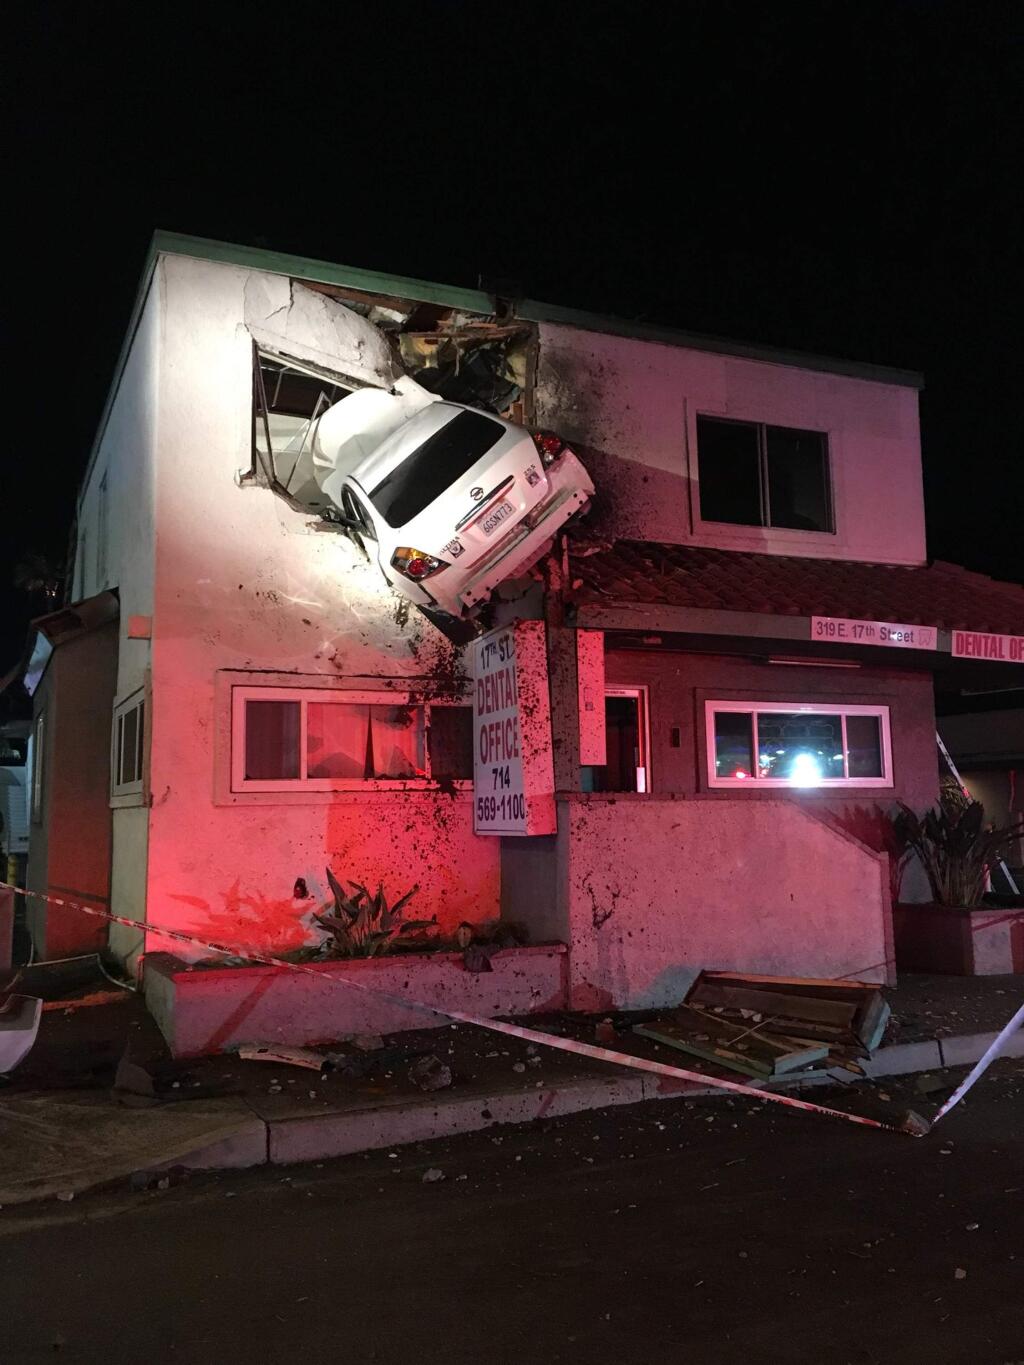 In this Sunday, Jan. 14, 2018, photo provided by Orange County Fire Authority, a vehicle that crashed into a building hangs from a second story window in Santa Ana, Calif. Members from Orange County Fire Authority and Los Angeles County Urban Search & Rescue rescued two people, who escaped serious injuries when the car they were in went airborne and slammed into the second floor of a dental office in Southern California. Authorities say the Nissan Altima hit a center divider early Sunday, soared into the air and plowed into the top floor of the two-story structure. (Capt. Stephen Horner /Orange County Fire Authority via AP)